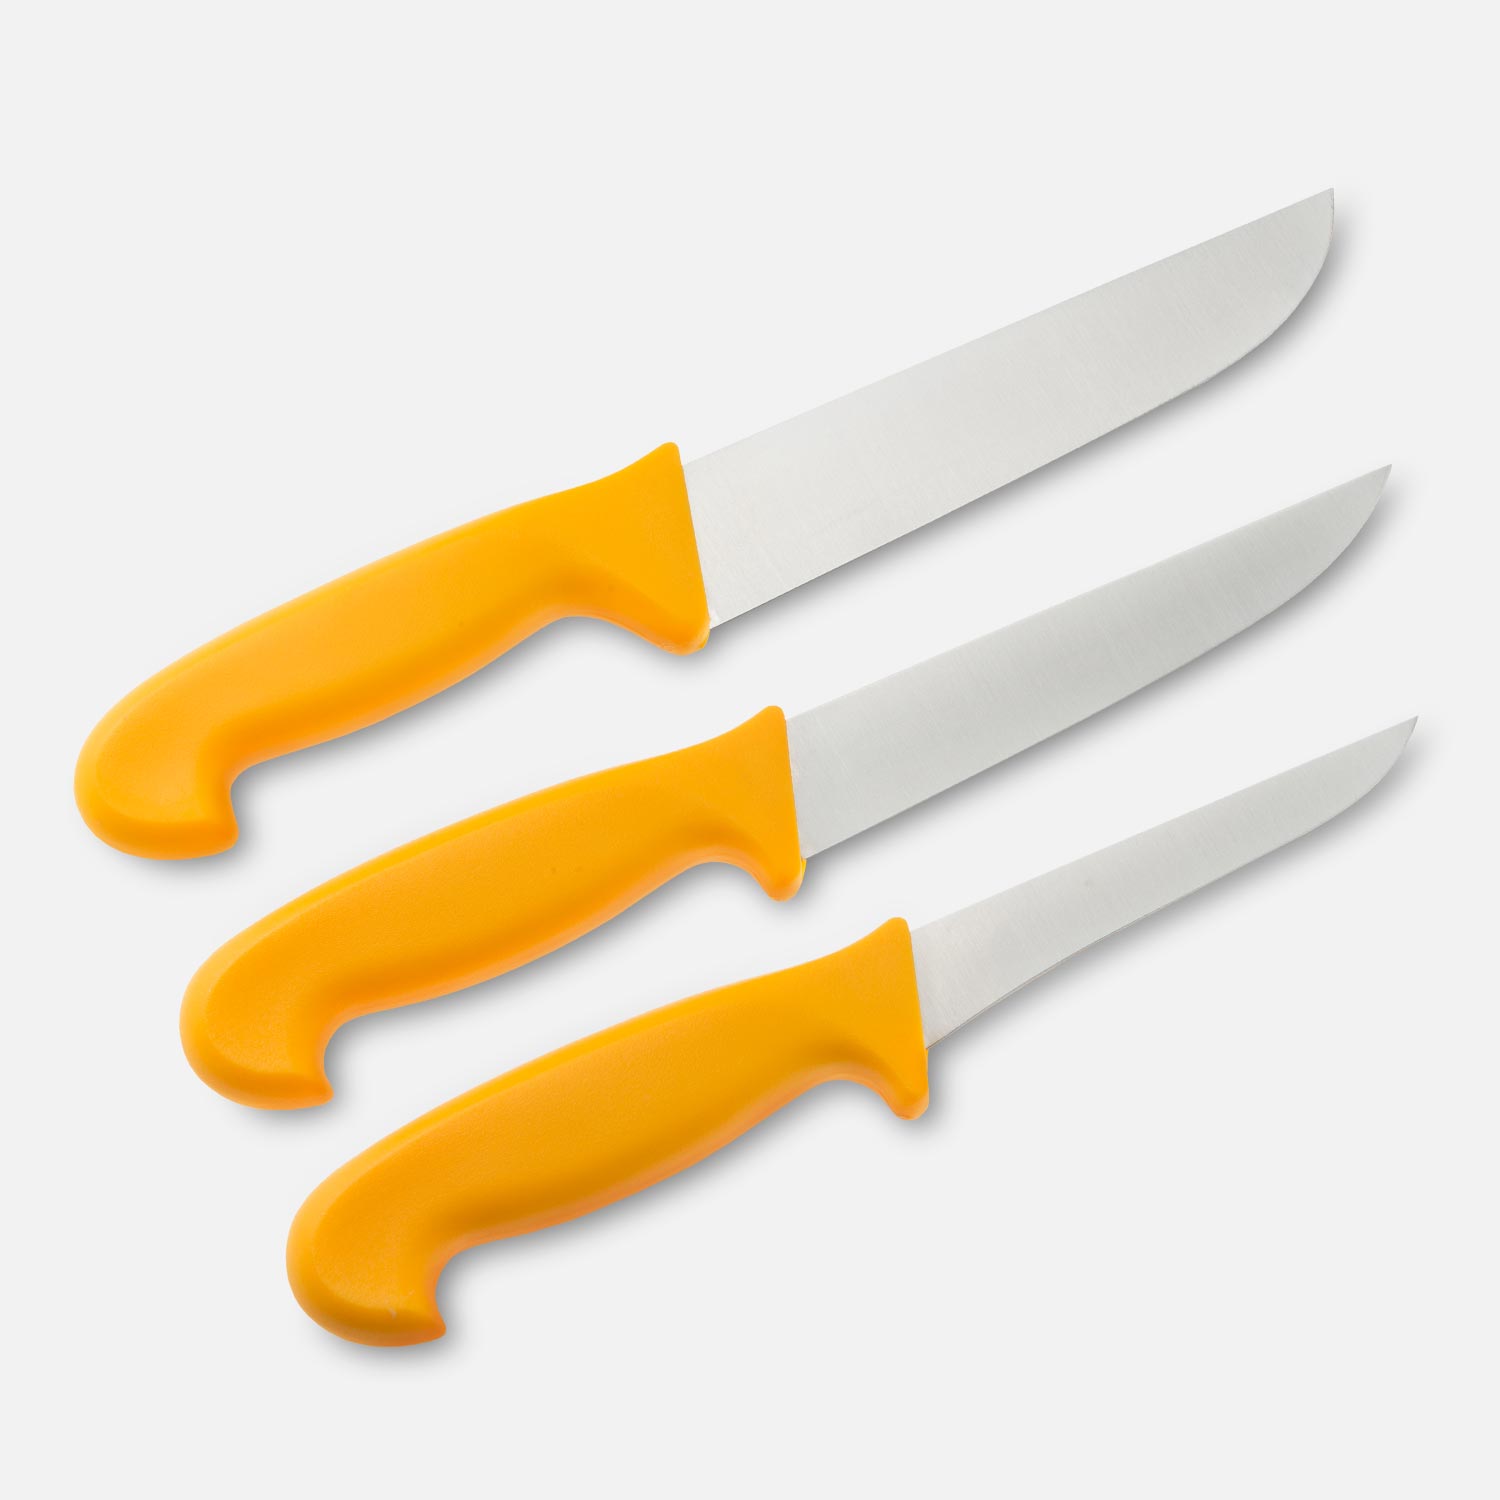 Butcher knives in a 3-piece set with yellow handles